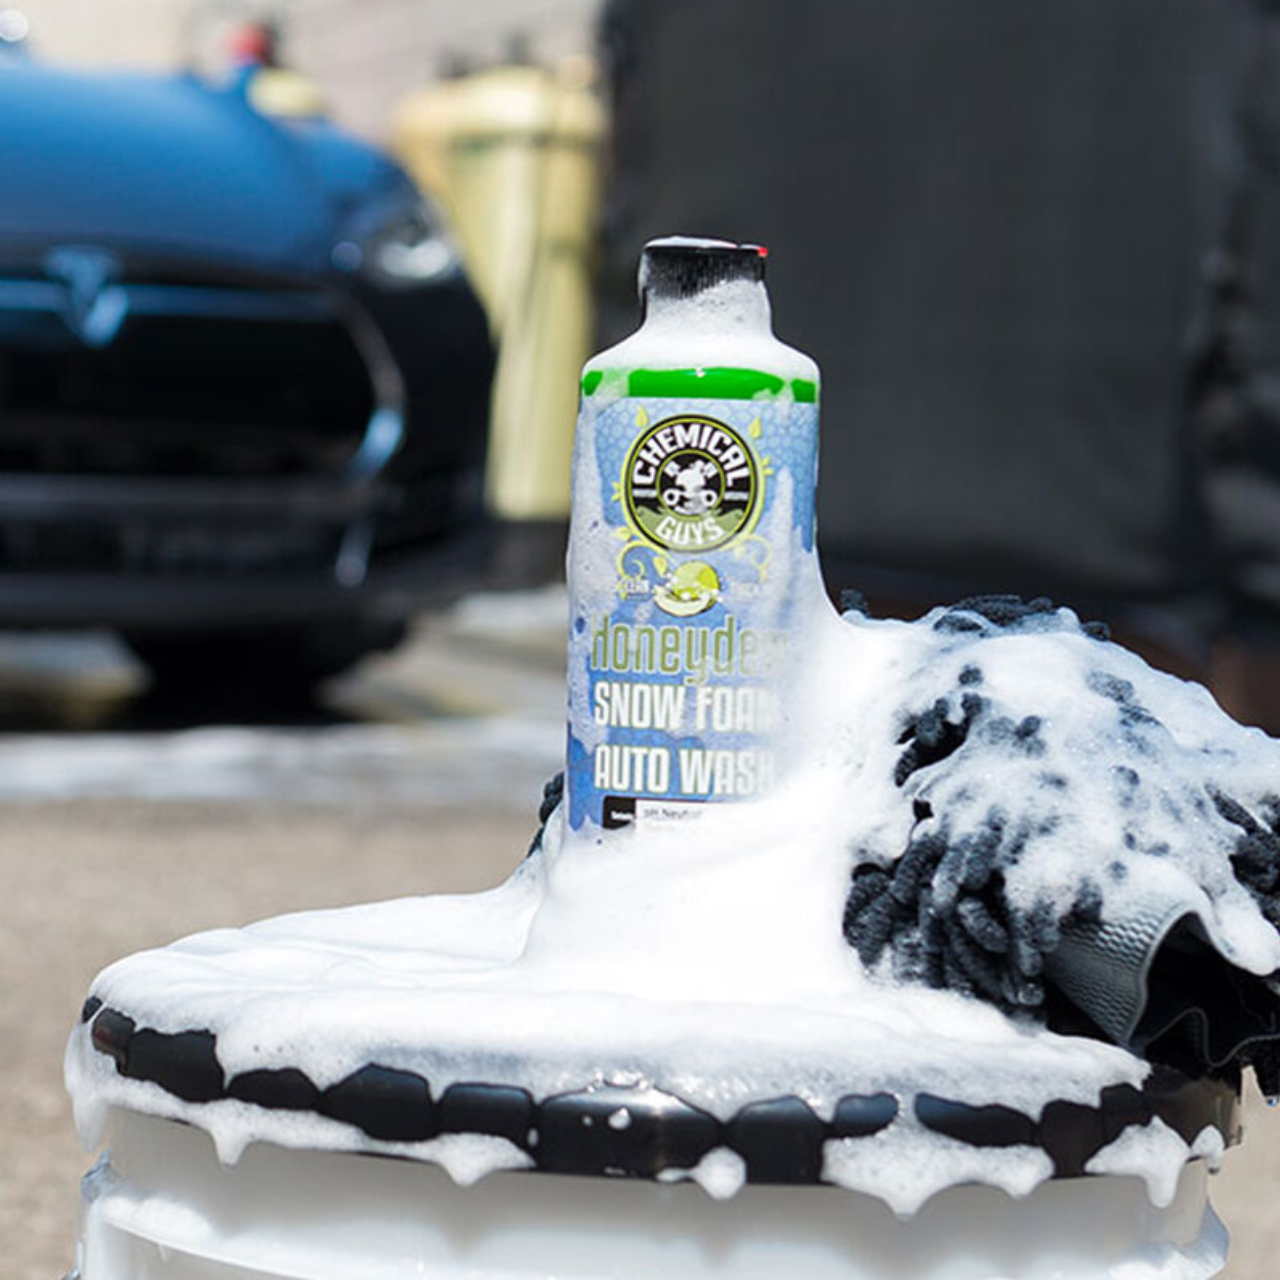 Foam Cannon with FREE Extreme Suds – Action Products